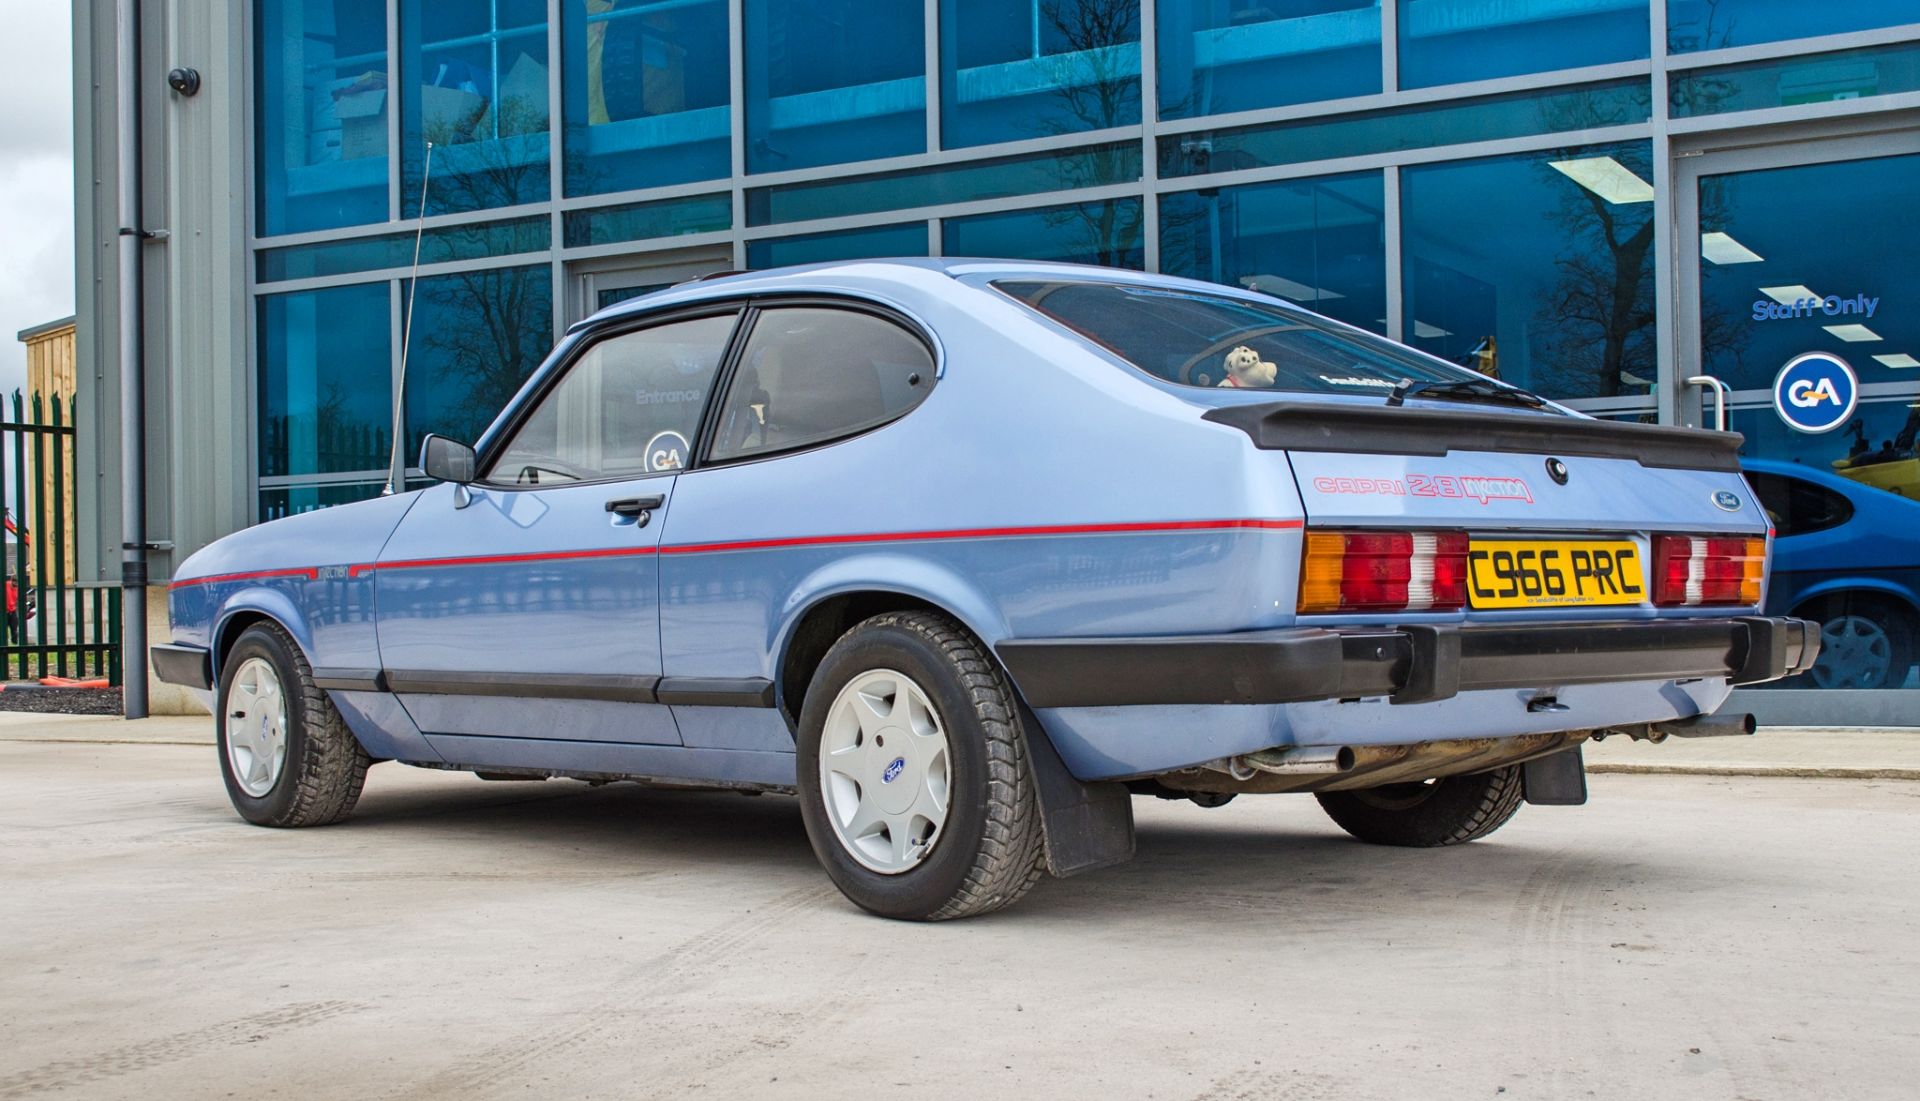 1986 Ford Capri 2.8 Injection Special 3 door coupe - Image 7 of 56